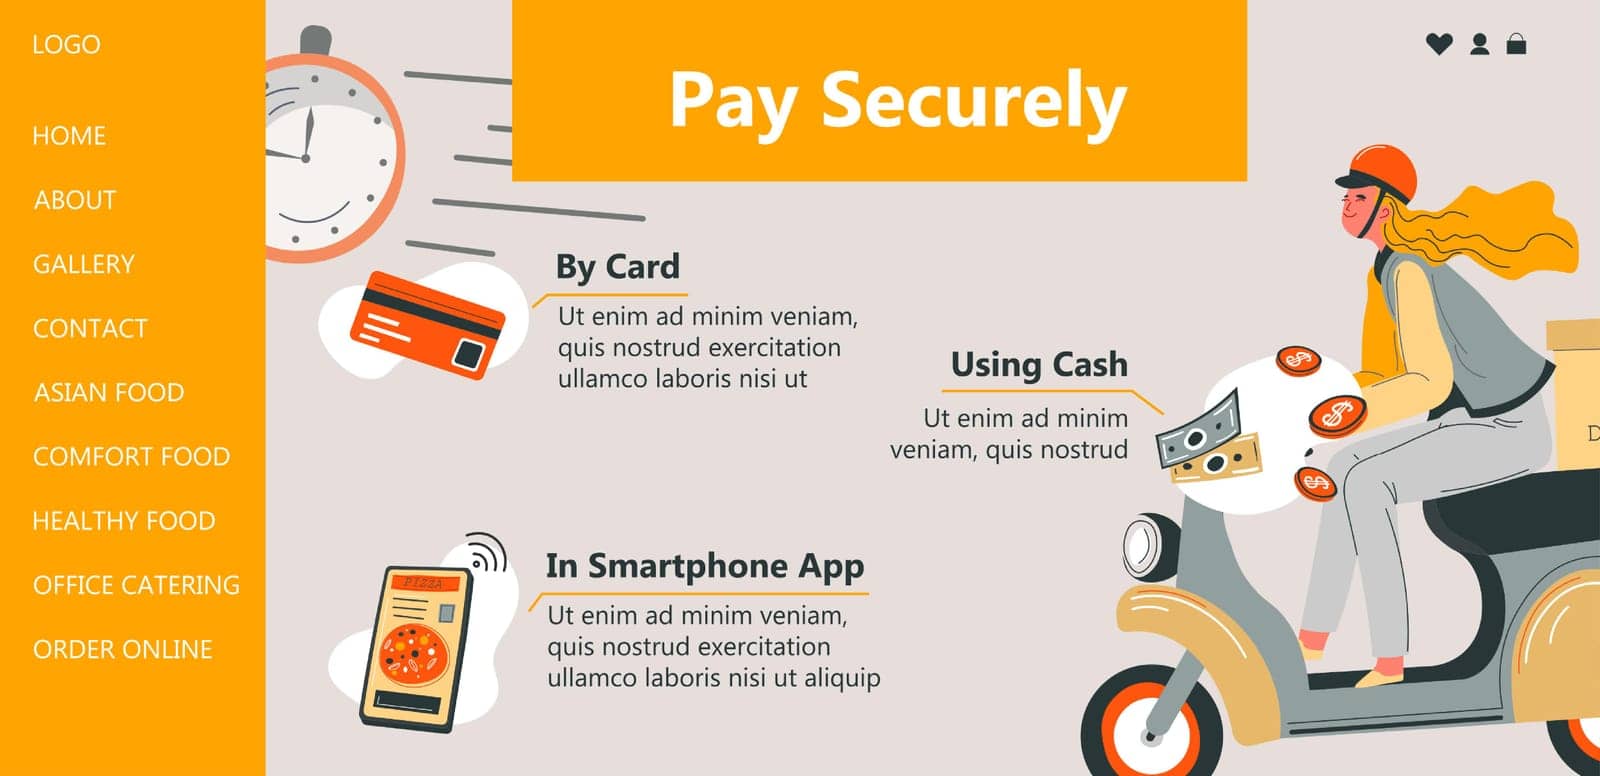 Pay securely, by card, smartphone app or cash by Sonulkaster